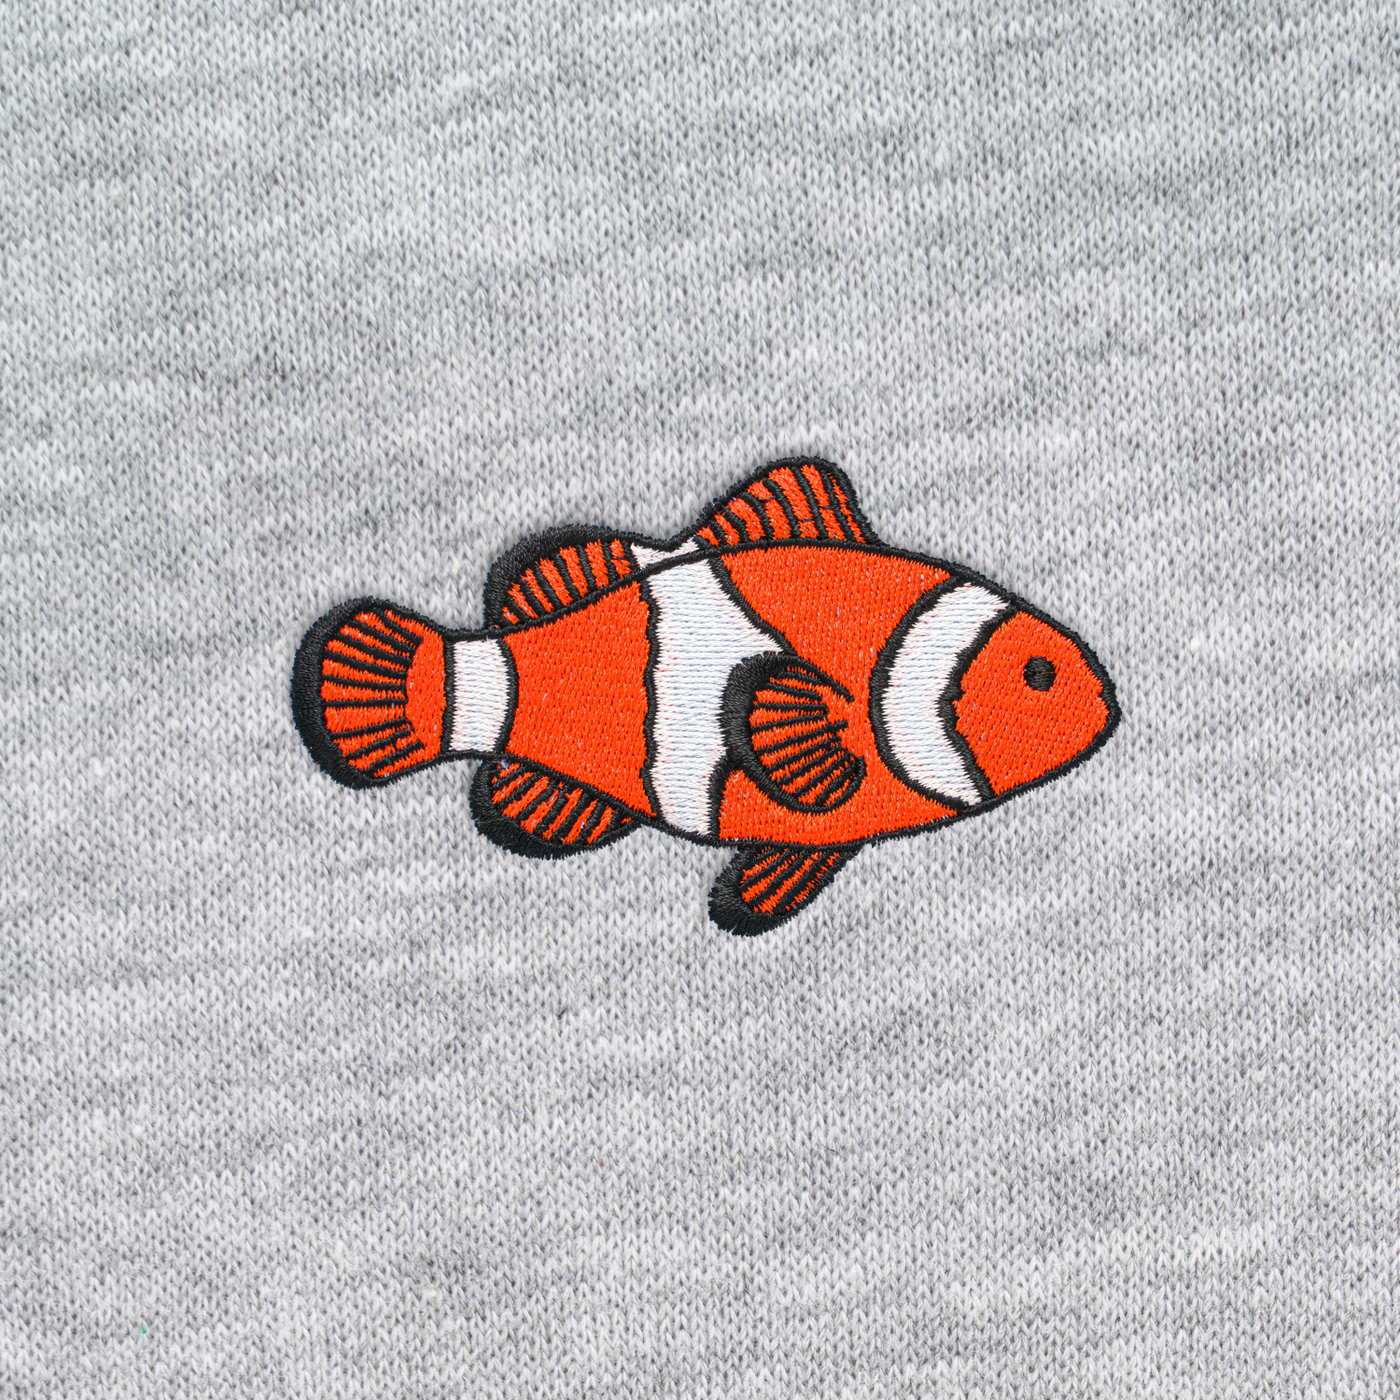 Bobby's Planet Men's Embroidered Clownfish Shorts from Seven Seas Fish Animals Collection in Heather Grey Color#color_heather-grey